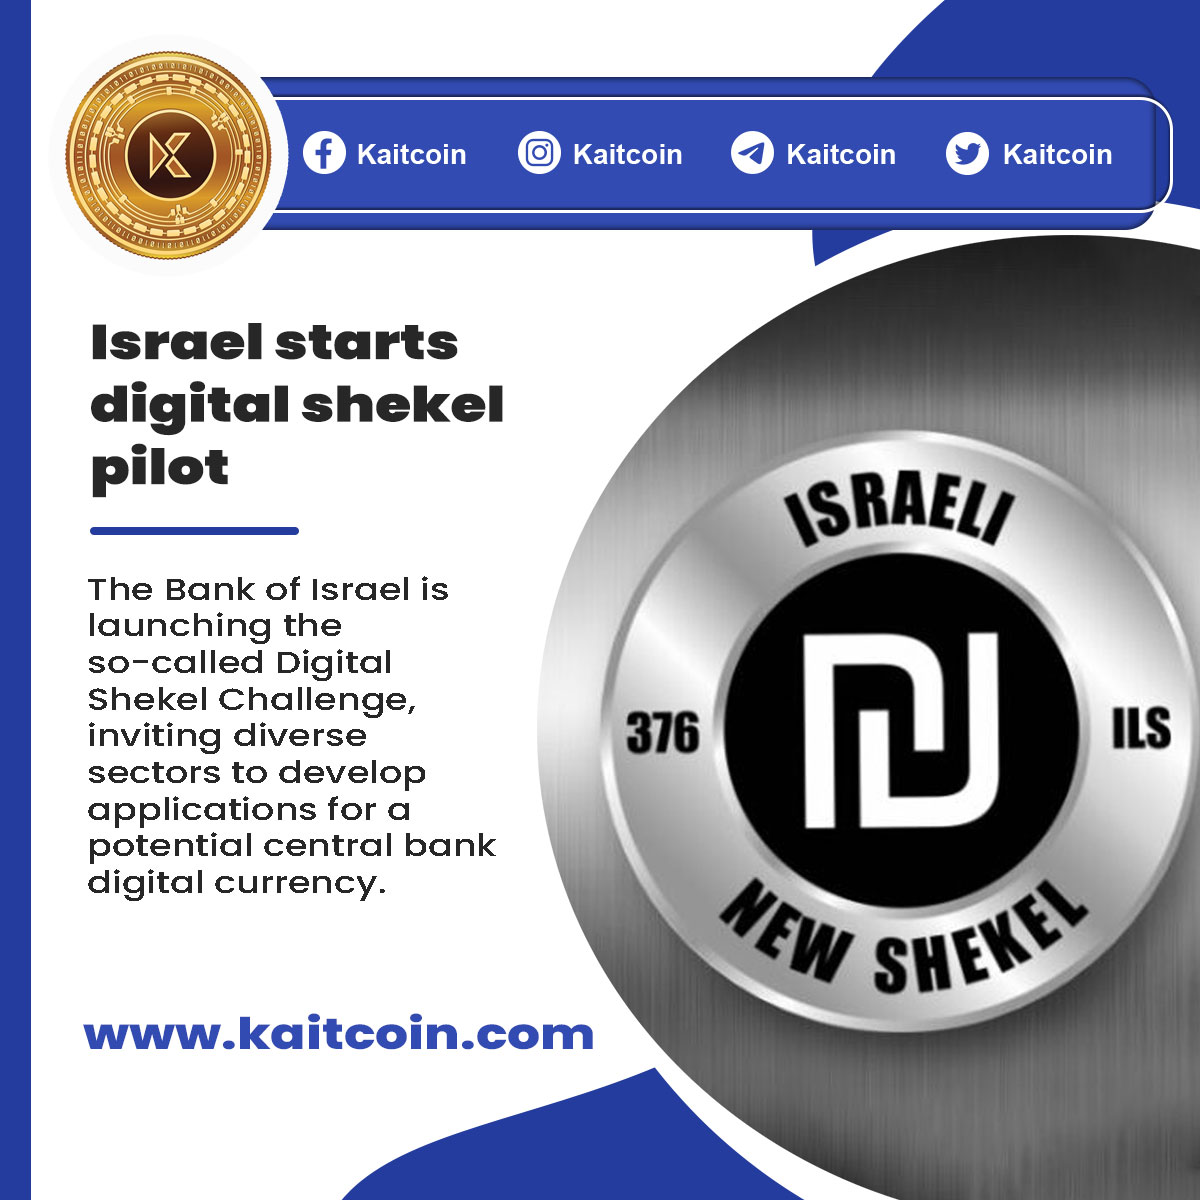 Israel launches a digital shekel experiment. 

For more details and Updates.
Website: kaitcrypto.com
Mail Id: Support@kaitcoin.com

#kait #kaitcoin #crypto #Israel #cryptocurrency #regulation #Digitalcurrency #buyandsell #btc #eth